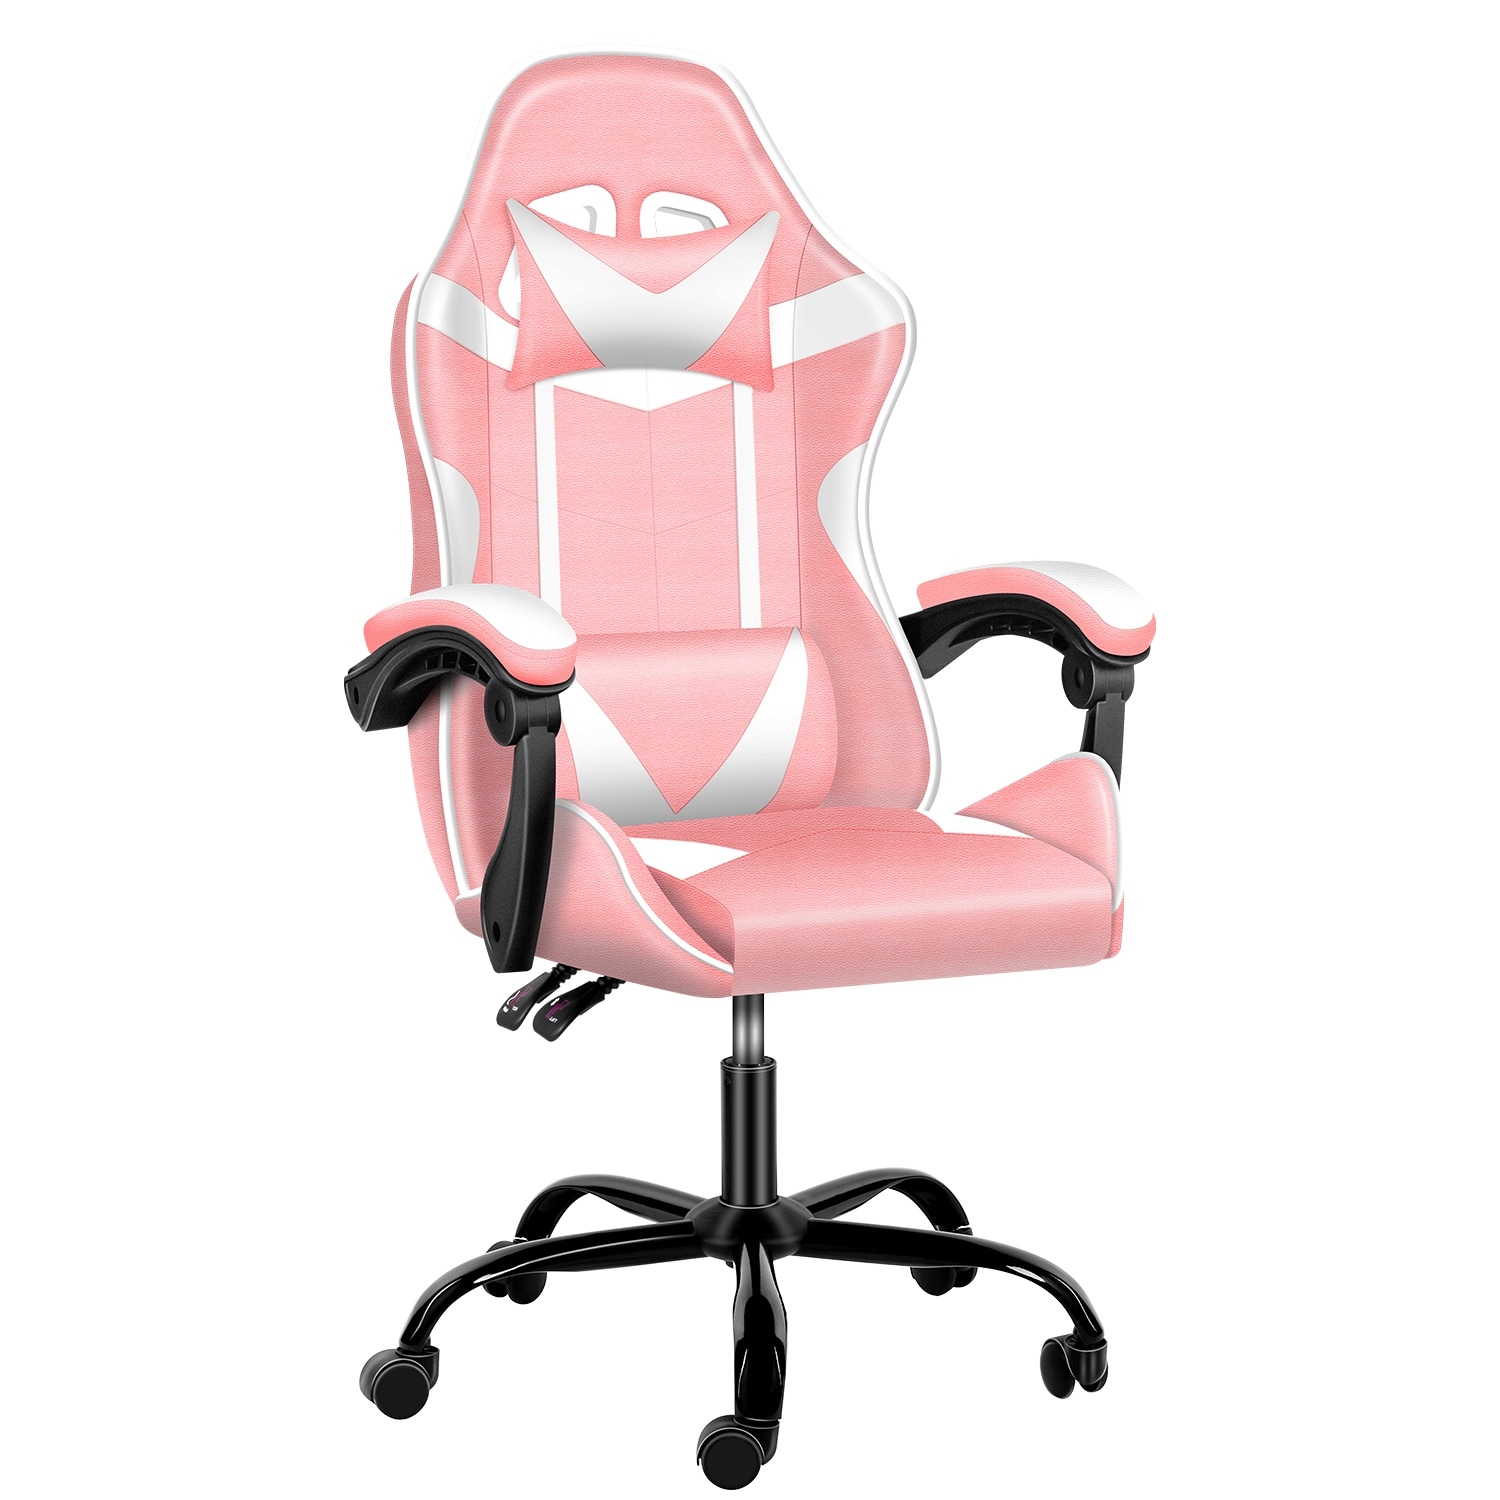 https://ak1.ostkcdn.com/images/products/is/images/direct/6e9eb0b509380b561e57482555c08132a7ba1571/Simple-Deluxe-Gaming-Chair%2C-Office-High-Back-Computer-Ergonomic-Adjustable-Swivel-Chair-with-Headrest-and-Lumbar-Support%2C-Pink.jpg